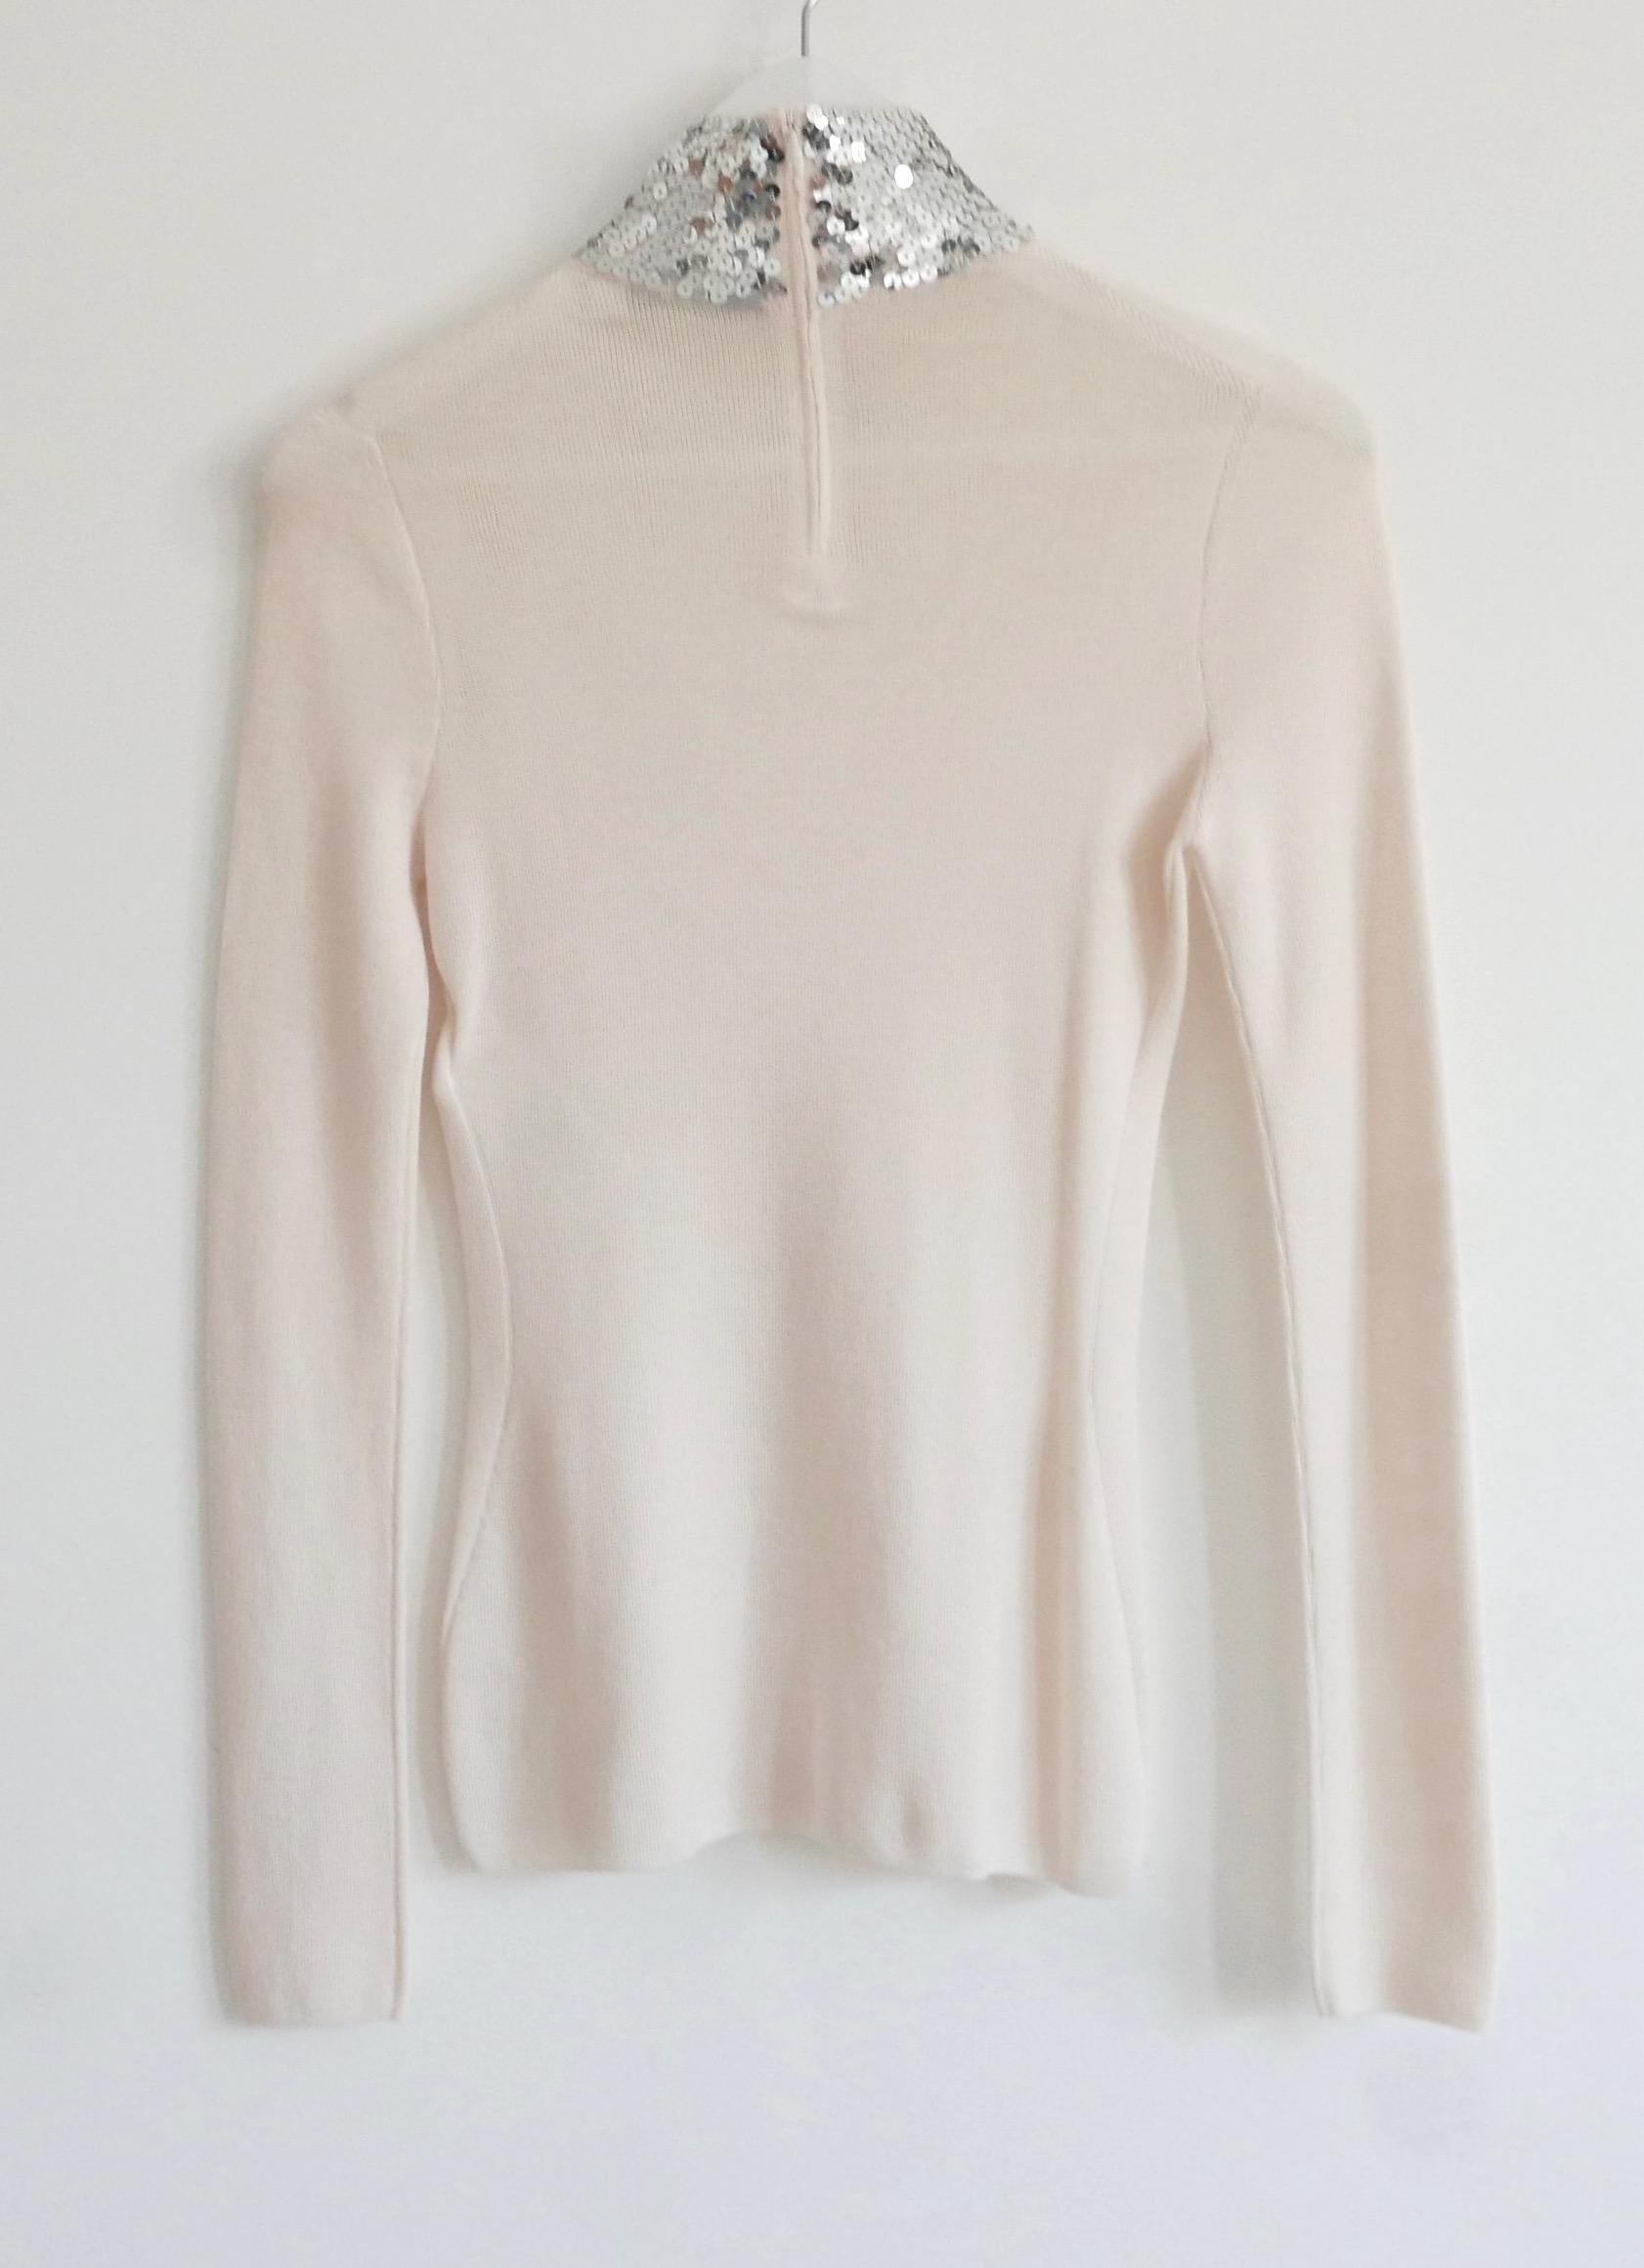 Dior x Raf Simons Pre-Fall 2015 Sequin High Neck Fine Knit Sweater In New Condition For Sale In London, GB